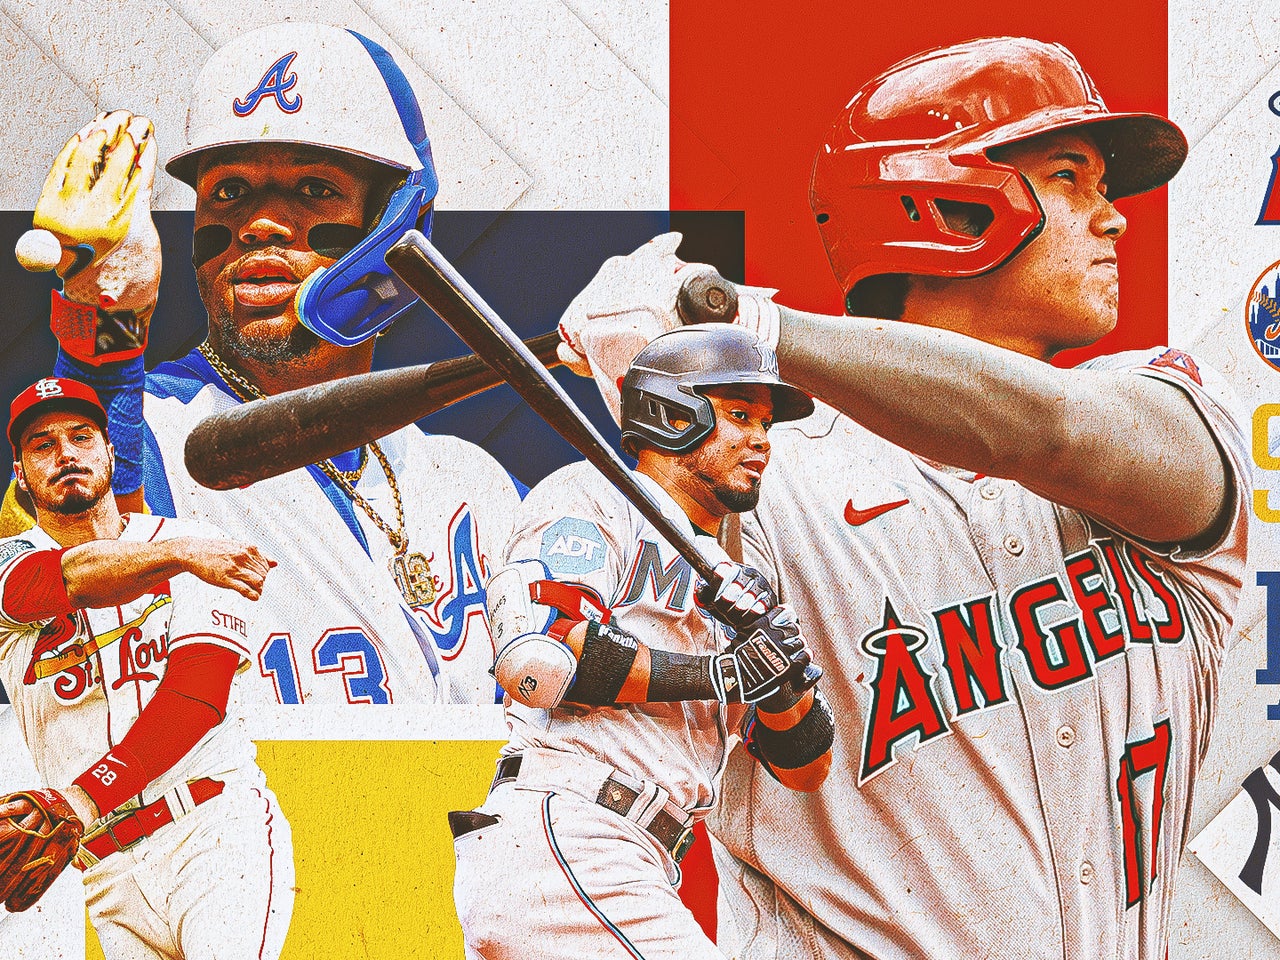 MLB - No shortage of star power in the Freeway Series